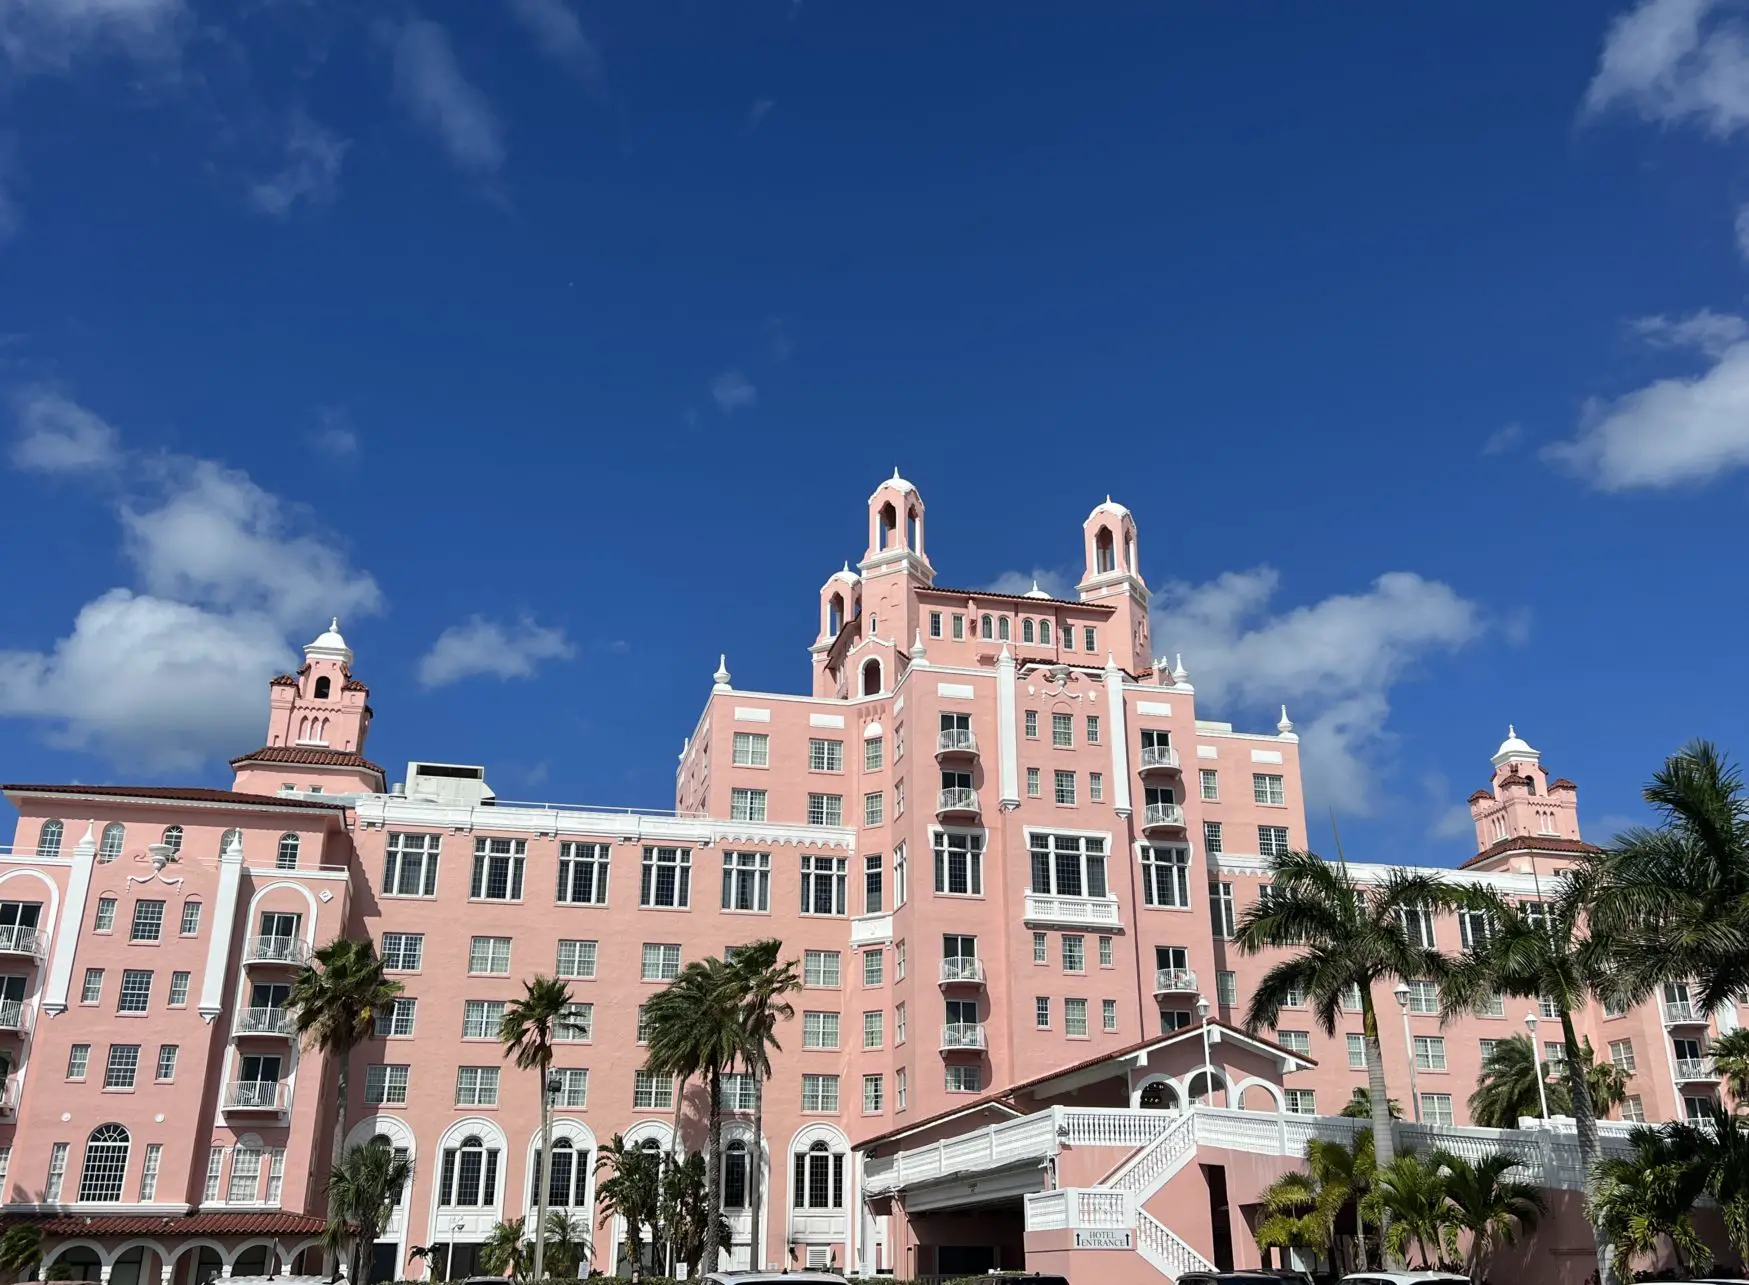 The famous Don Cesar in Florida, USA.